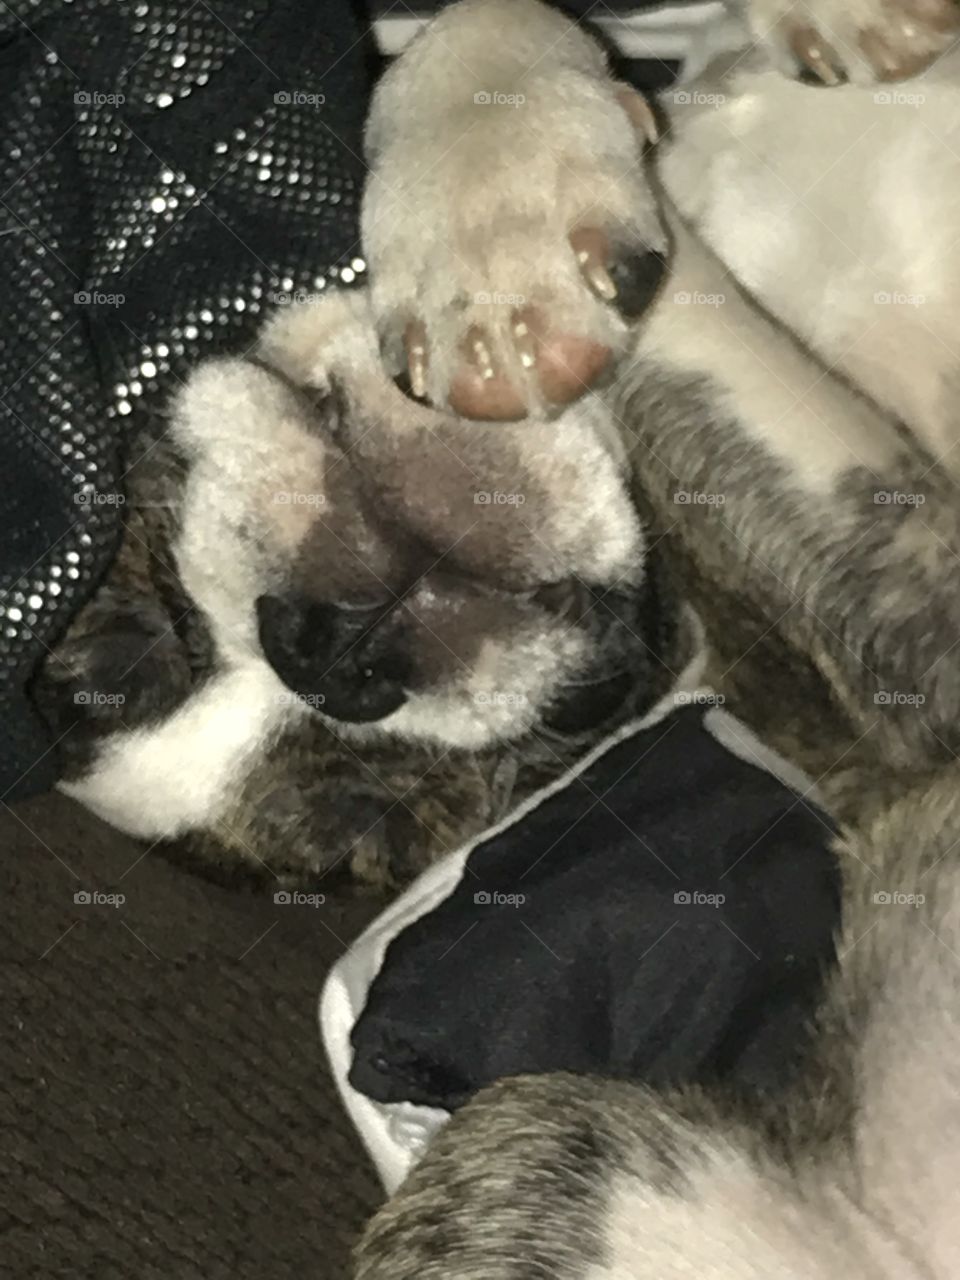 Goofy little pup passed out upside down. Sleepy no on her back with her cute little nose front and center. How is that even comfortable?